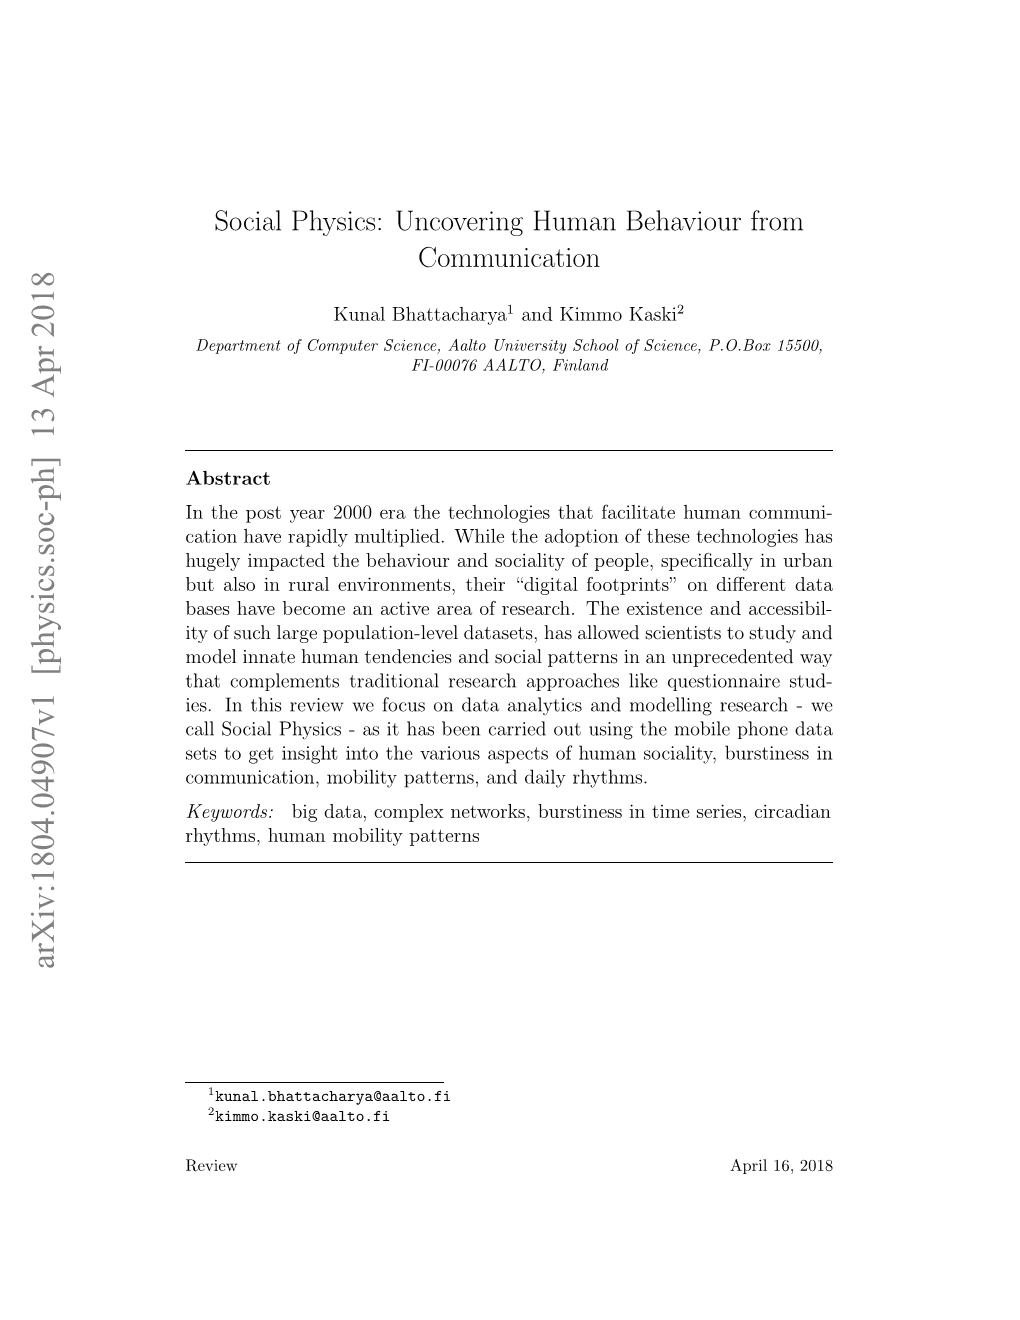 Social Physics: Uncovering Human Behaviour from Communication